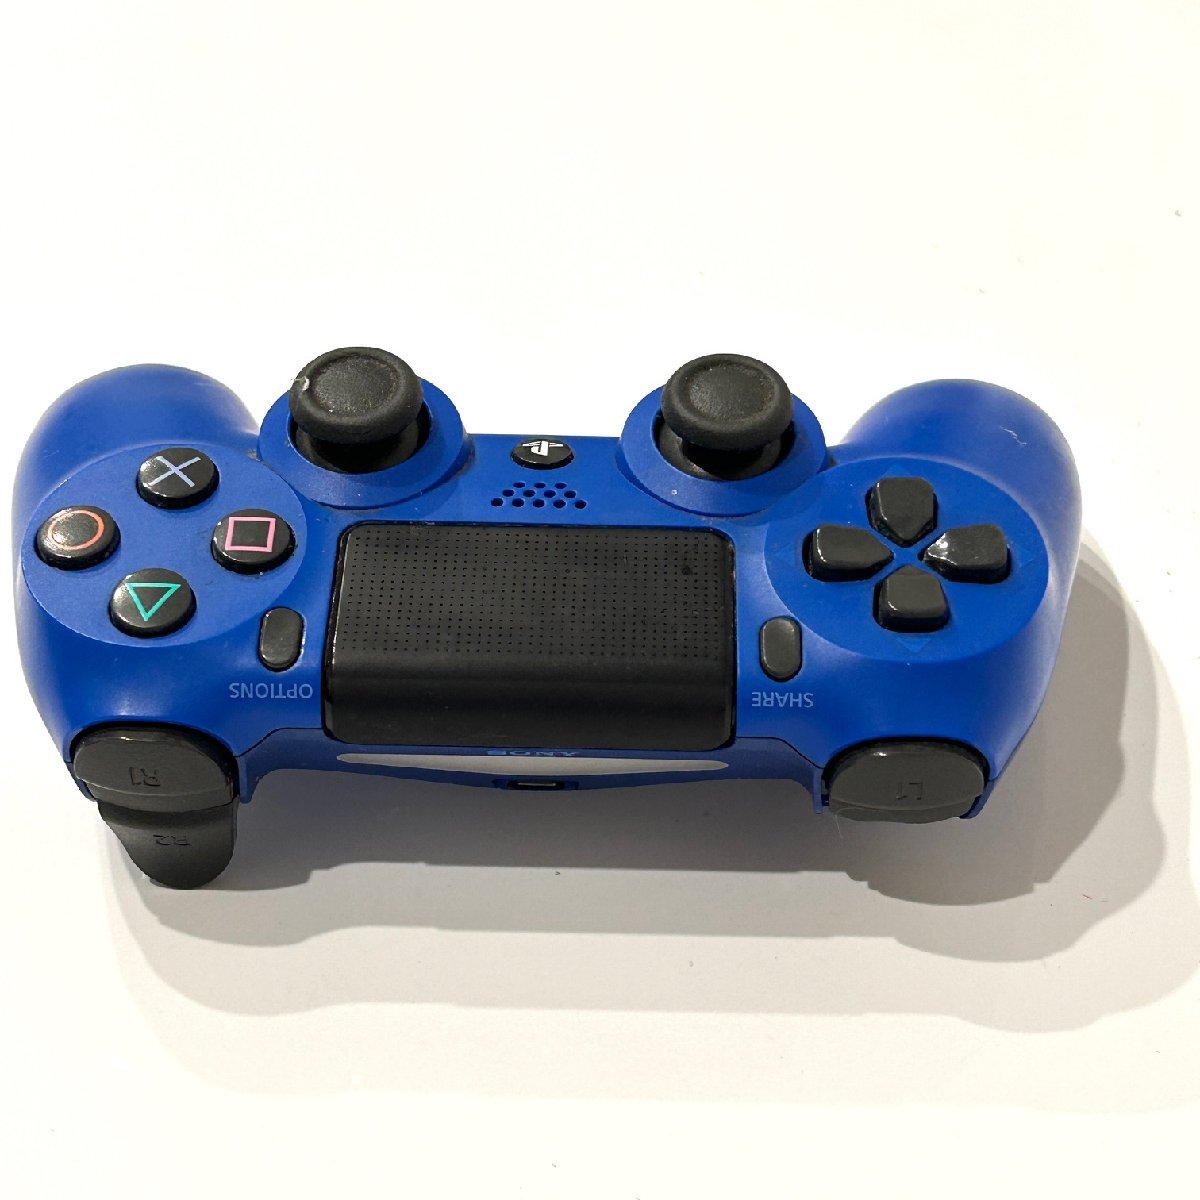 [77]1 jpy ~ SONY PS4 wireless controller CUH-ZCT2J operation not yet verification junk 